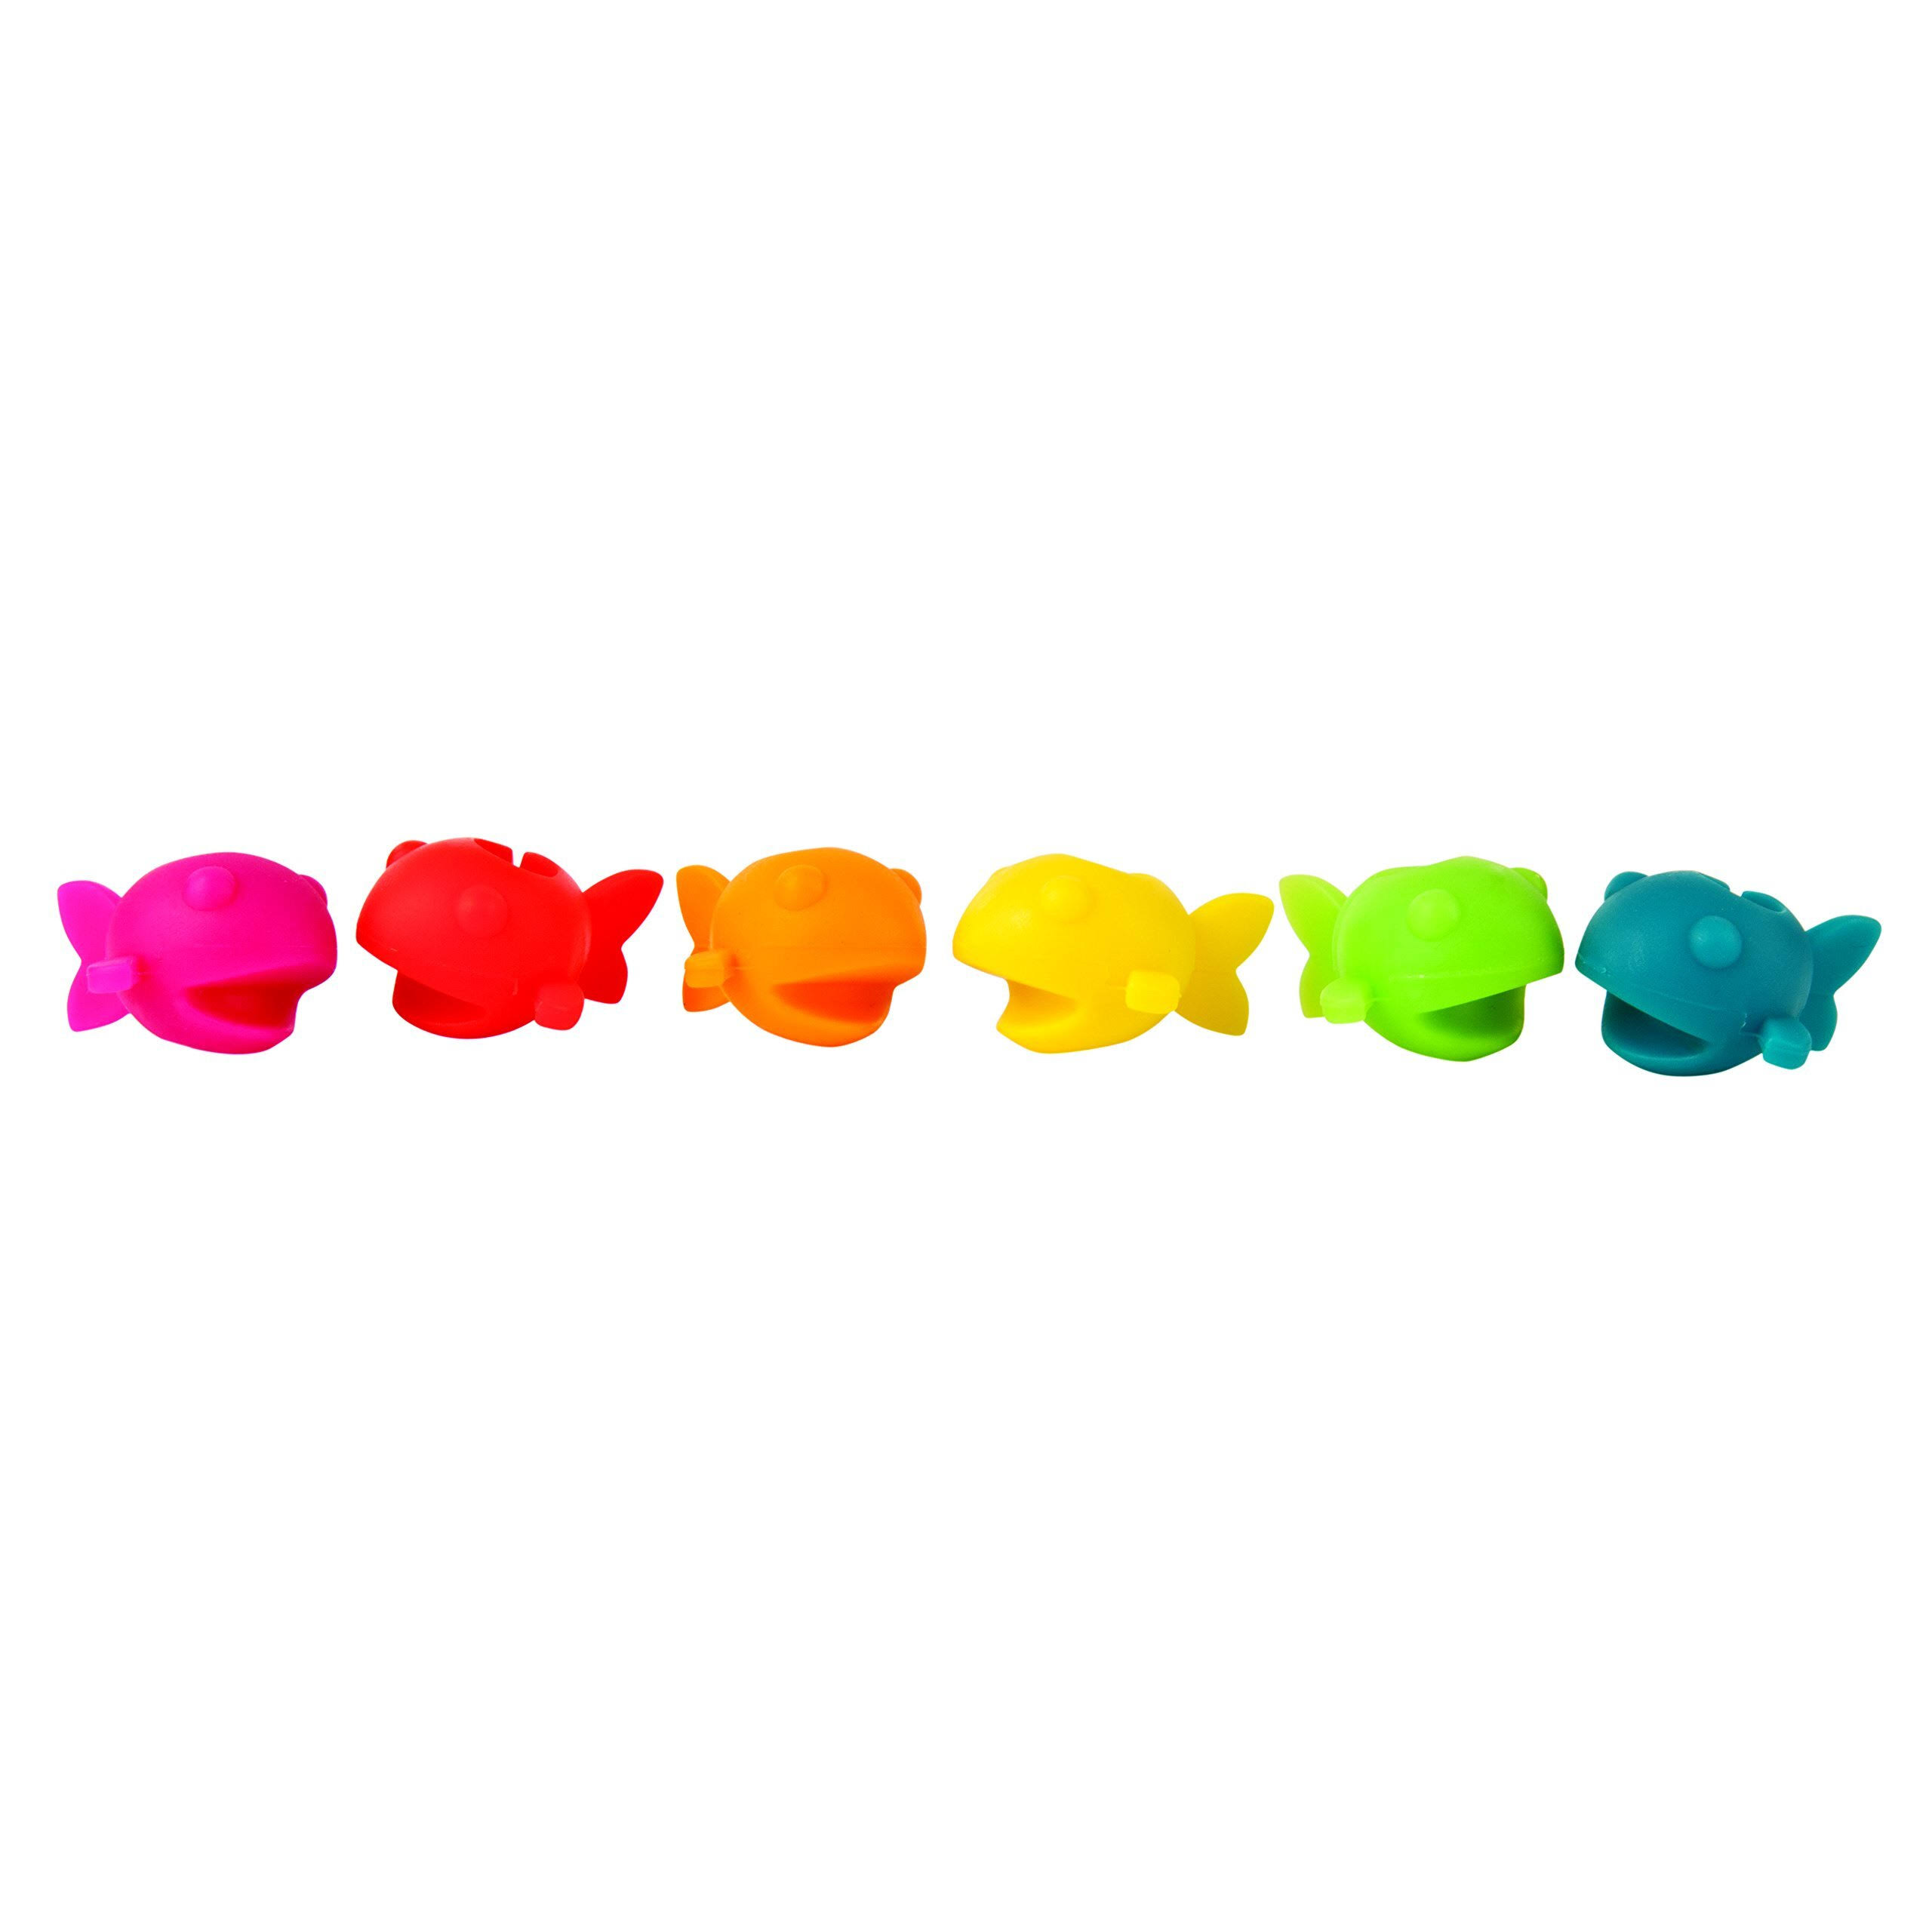 True Fabrications Guppy Silicone Wine Charms - Set of 6